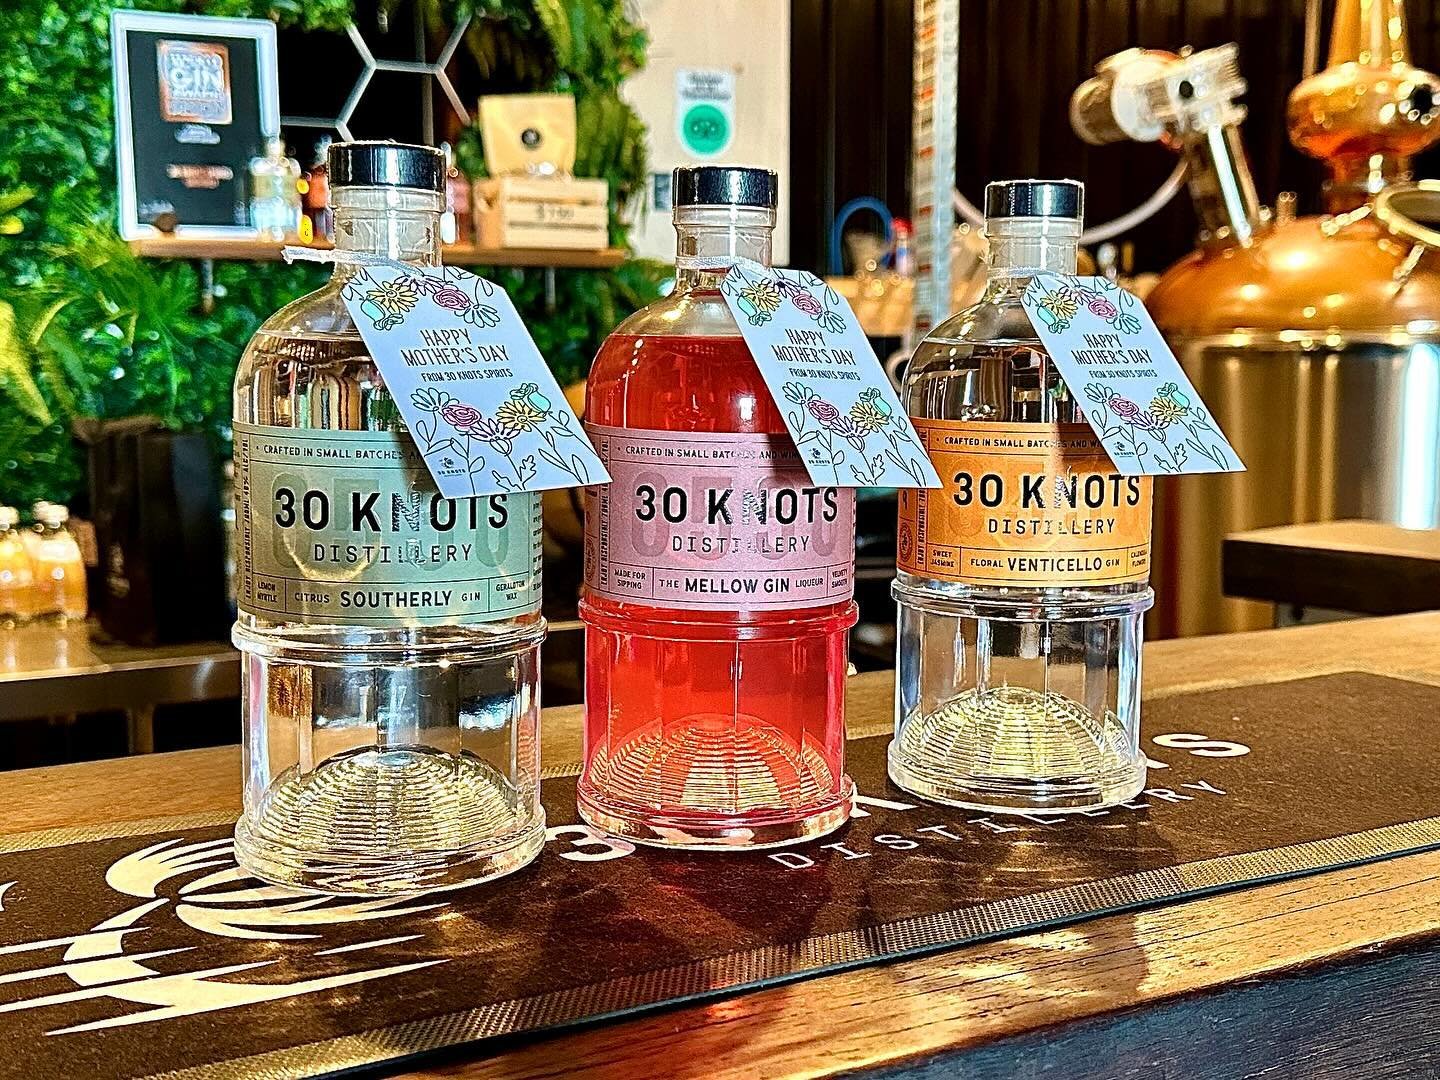 🎁 Give the gift of Gin this Mother&rsquo;s Day. 

Treat your mum to some locally handcrafted Gin made right here in Geraldton.

The Line-Up
Southerly - Triple citrus explosion
Venticello - Floral and fabulously fragrant
Mellow Gin Liqueur - Sweet, s